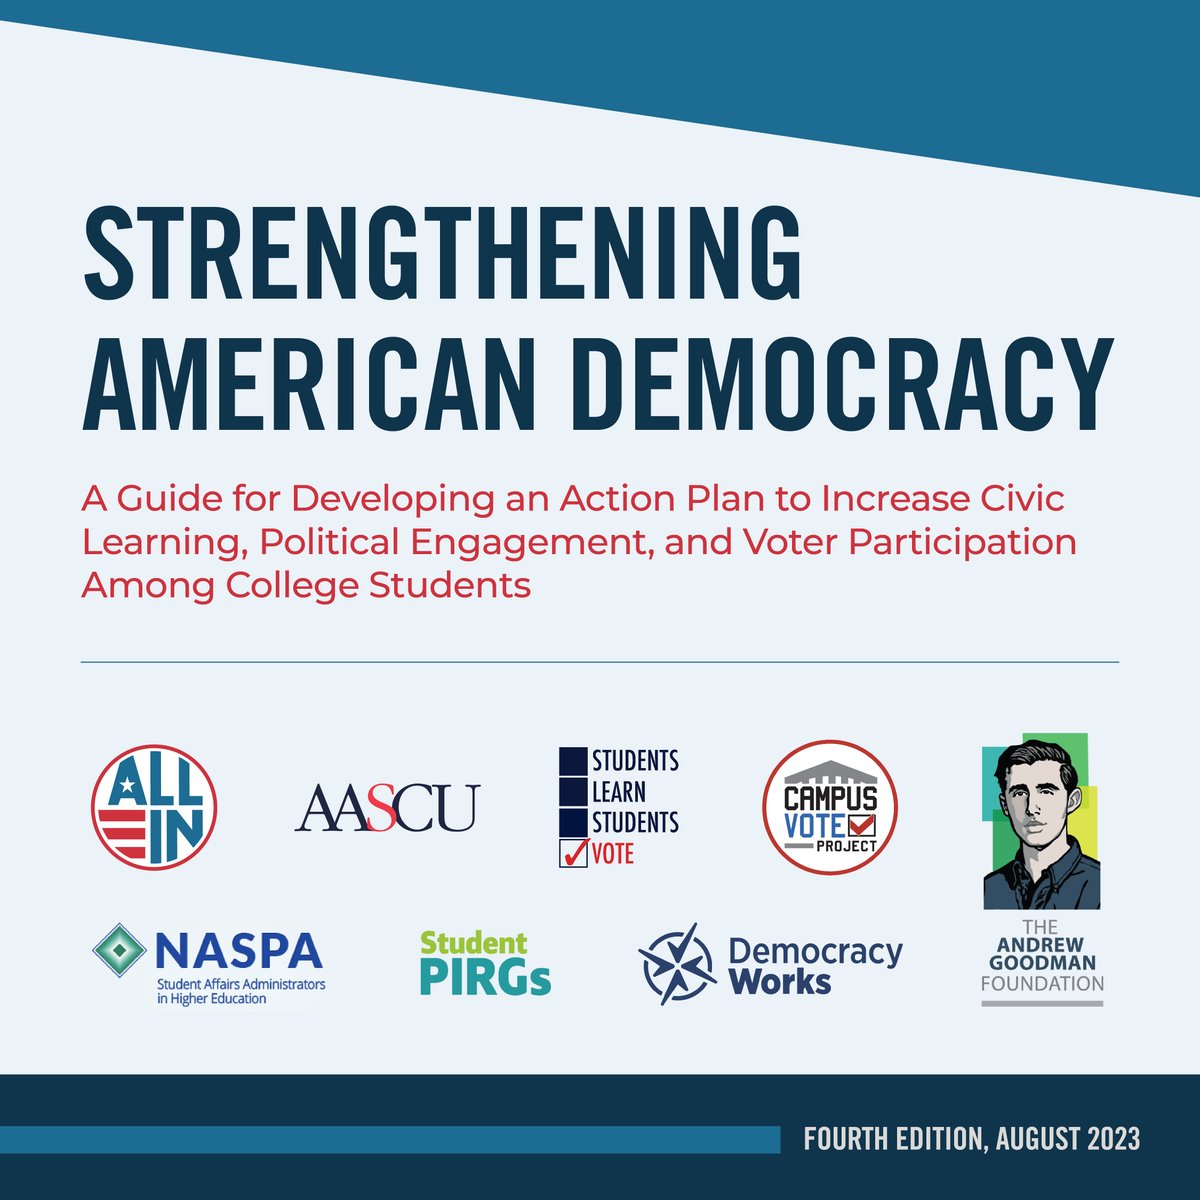 The fourth edition of the Strengthening Democracy Guide and Rubric is ready for your nonpartisan action planning needs! How are you engaging the #StudentVote this fall? allin.vote/SADGV4 @ADPaascu @allintovote @CampusVote @CivicNation @StudentPIRGs @SLSVCoalition